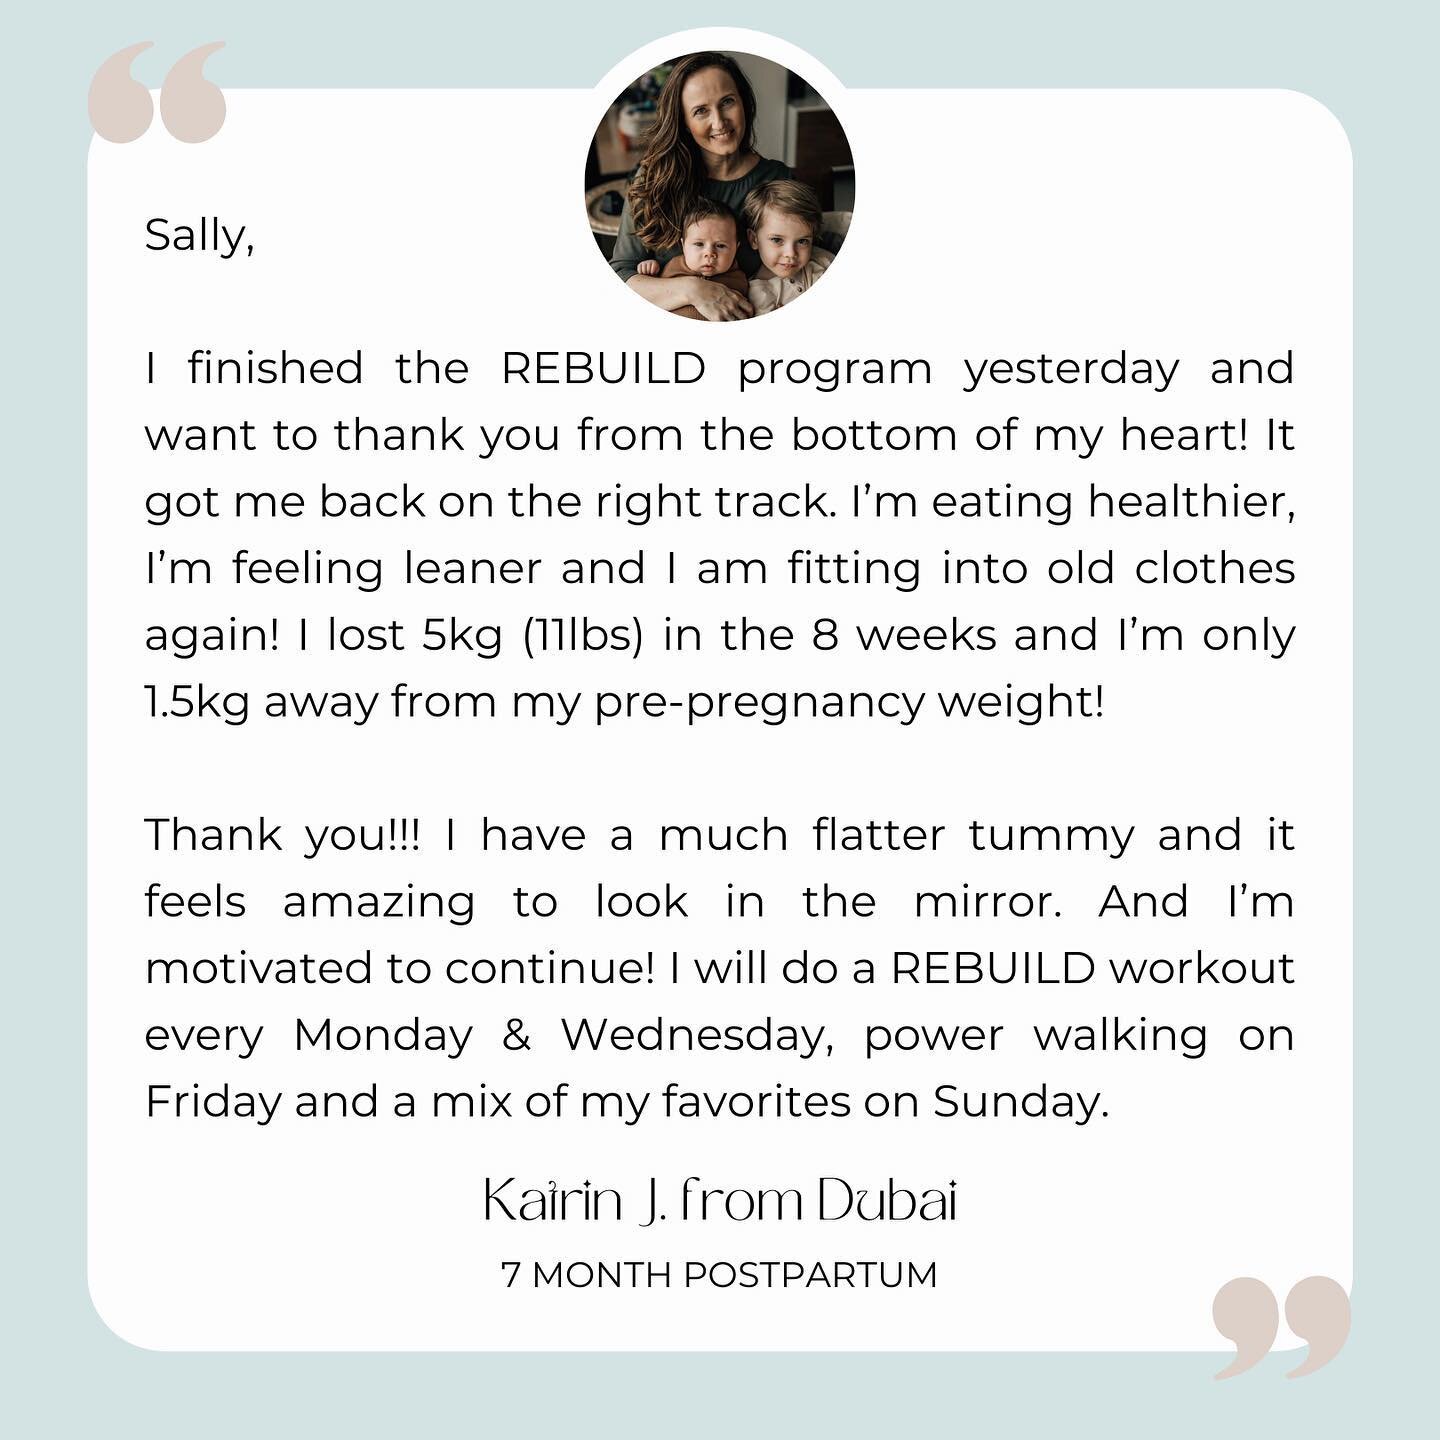 Can we all give a clap to Katrin, mama of 2, for taking care of herself 👏🏻 (double tap on pic)! She sent me this email and I&rsquo;m so proud of her! 

.
.
.

#postnatal #postnatalfitness #pregnancy #birth #fitness #review #postpartumprogram #postn